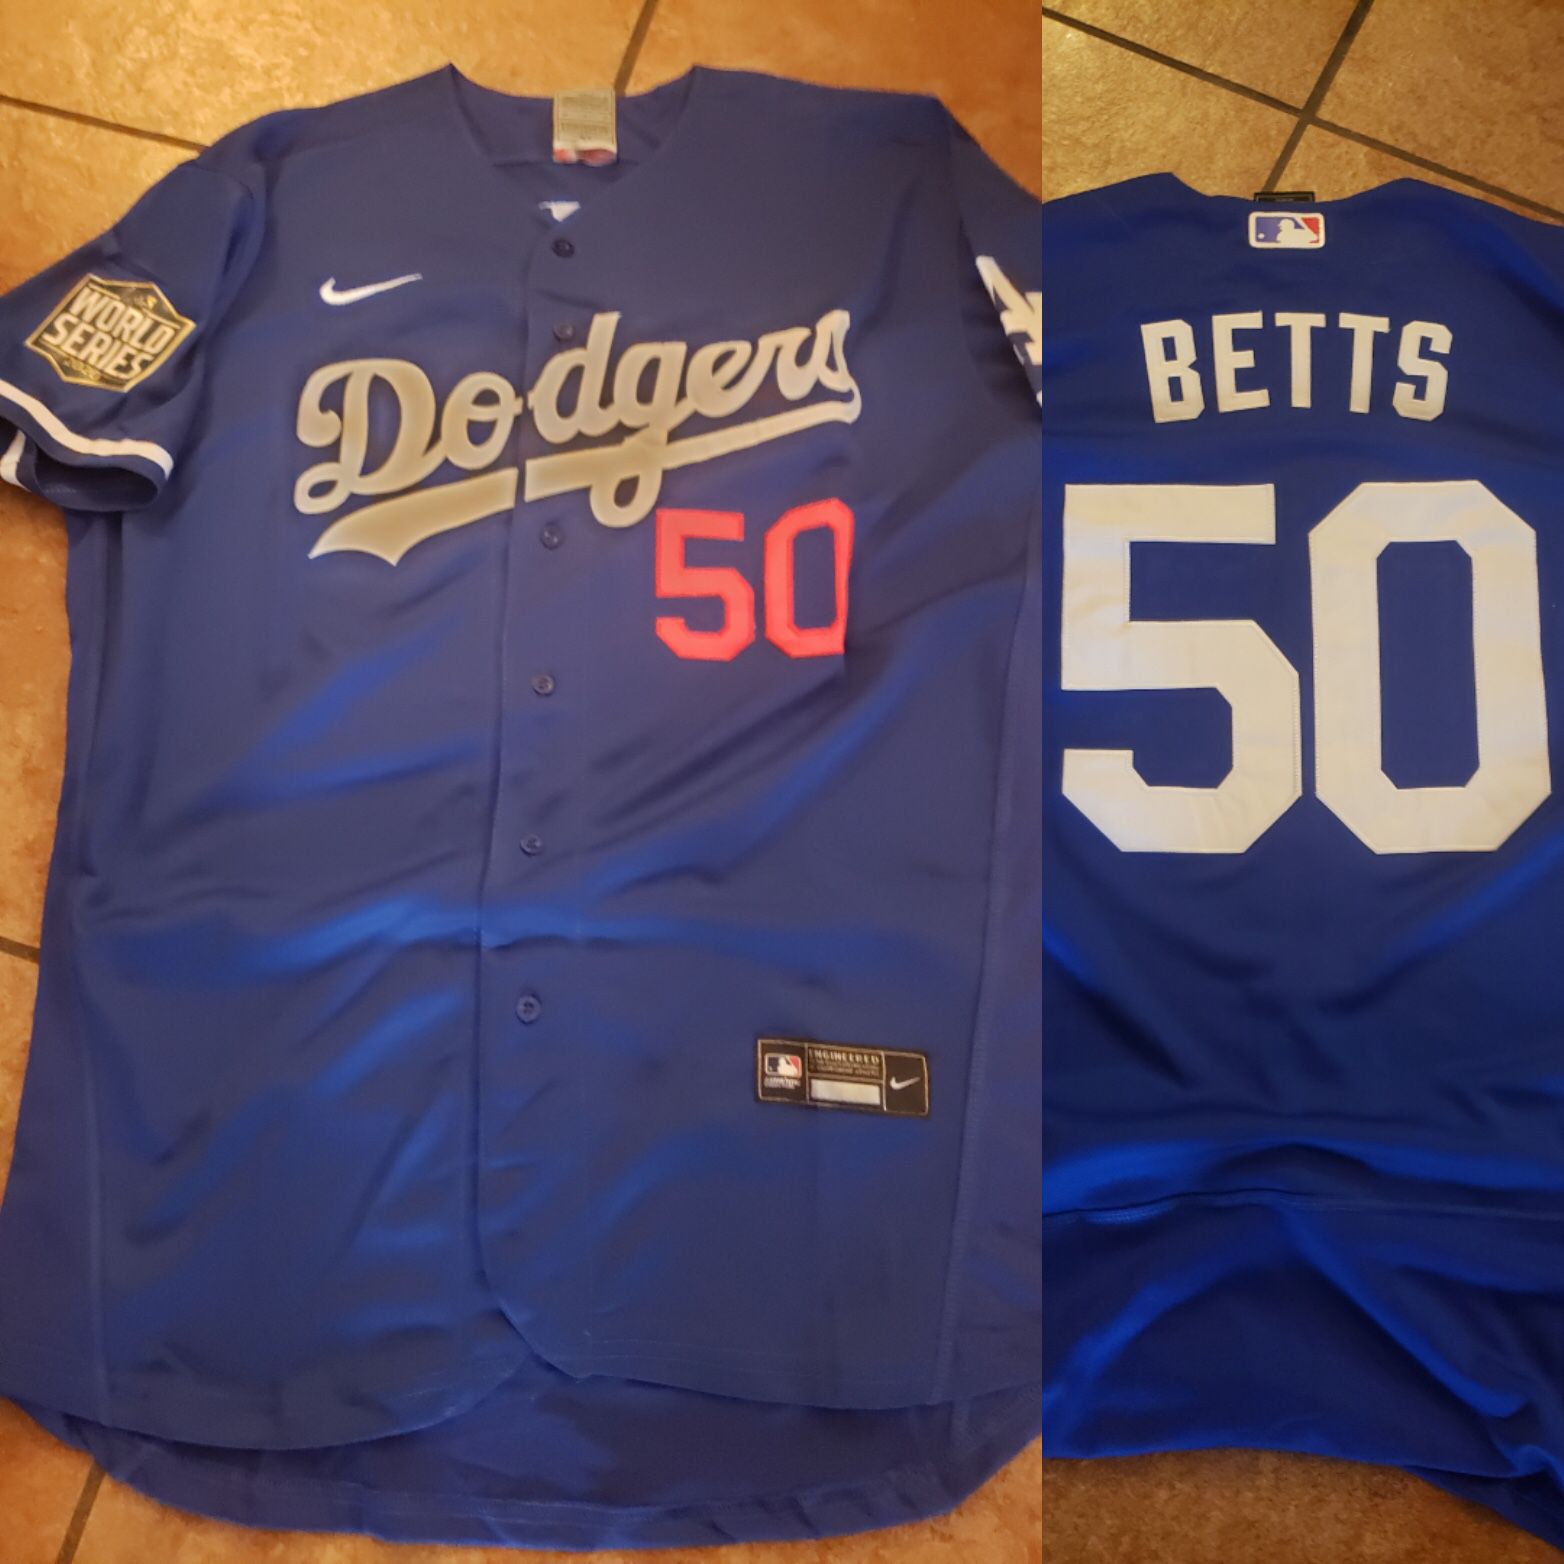 Dodgers betts jersey with World Series patch sizes Med to 3xl stitched firm price pick up only